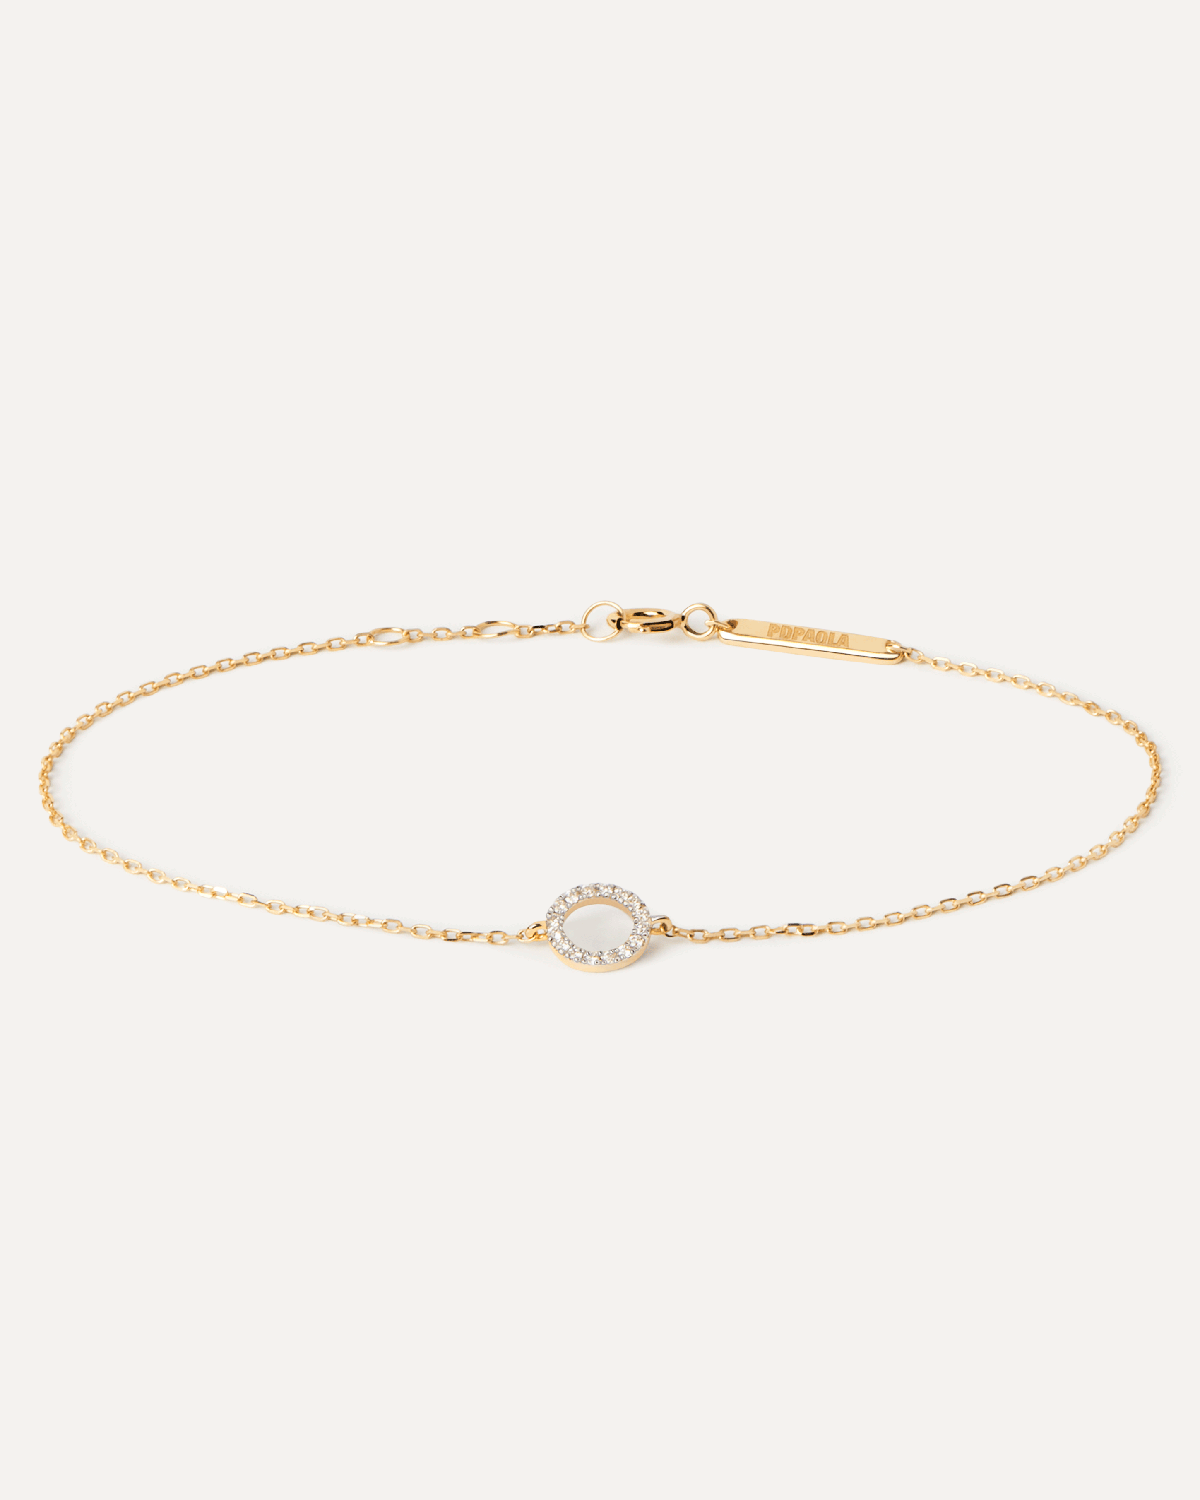 Diamonds and gold Circle bracelet. Solid yellow gold bracelet with a circle motif set with pavé lab-grown diamonds. Get the latest arrival from PDPAOLA. Place your order safely and get this Best Seller.